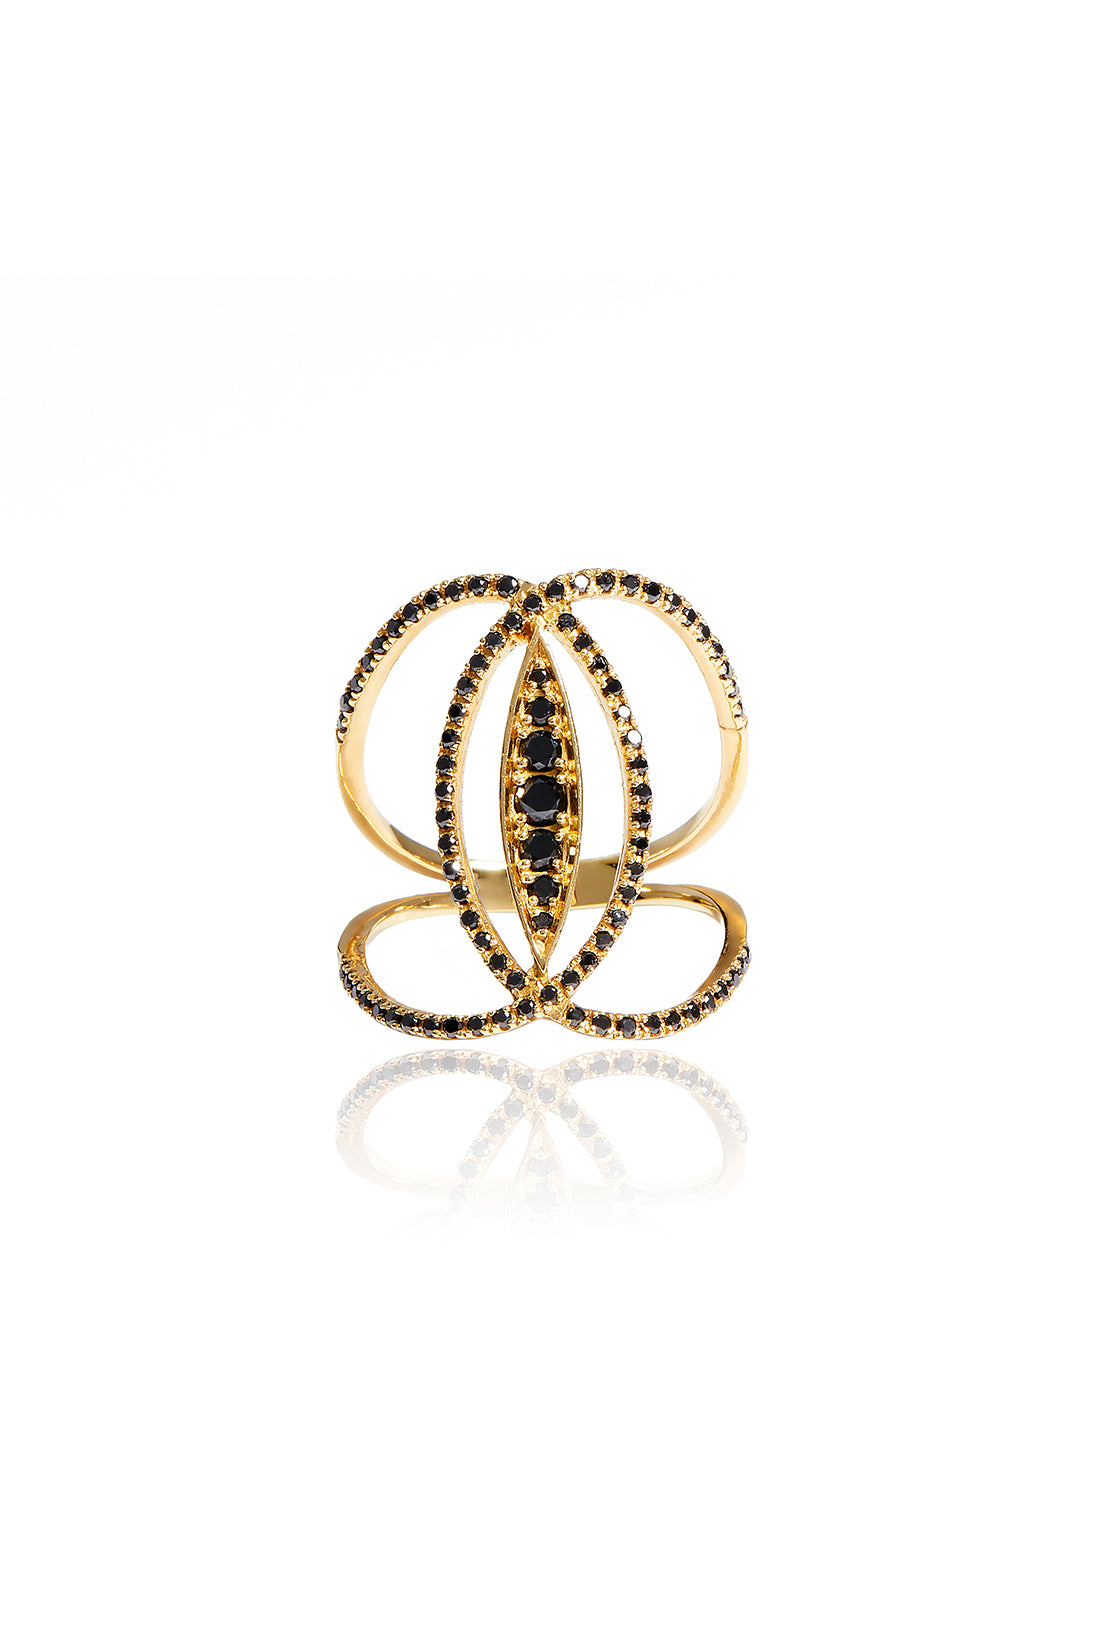 L.A. STEIN Black Diamond Marquis Ring in 18k Yellow Gold